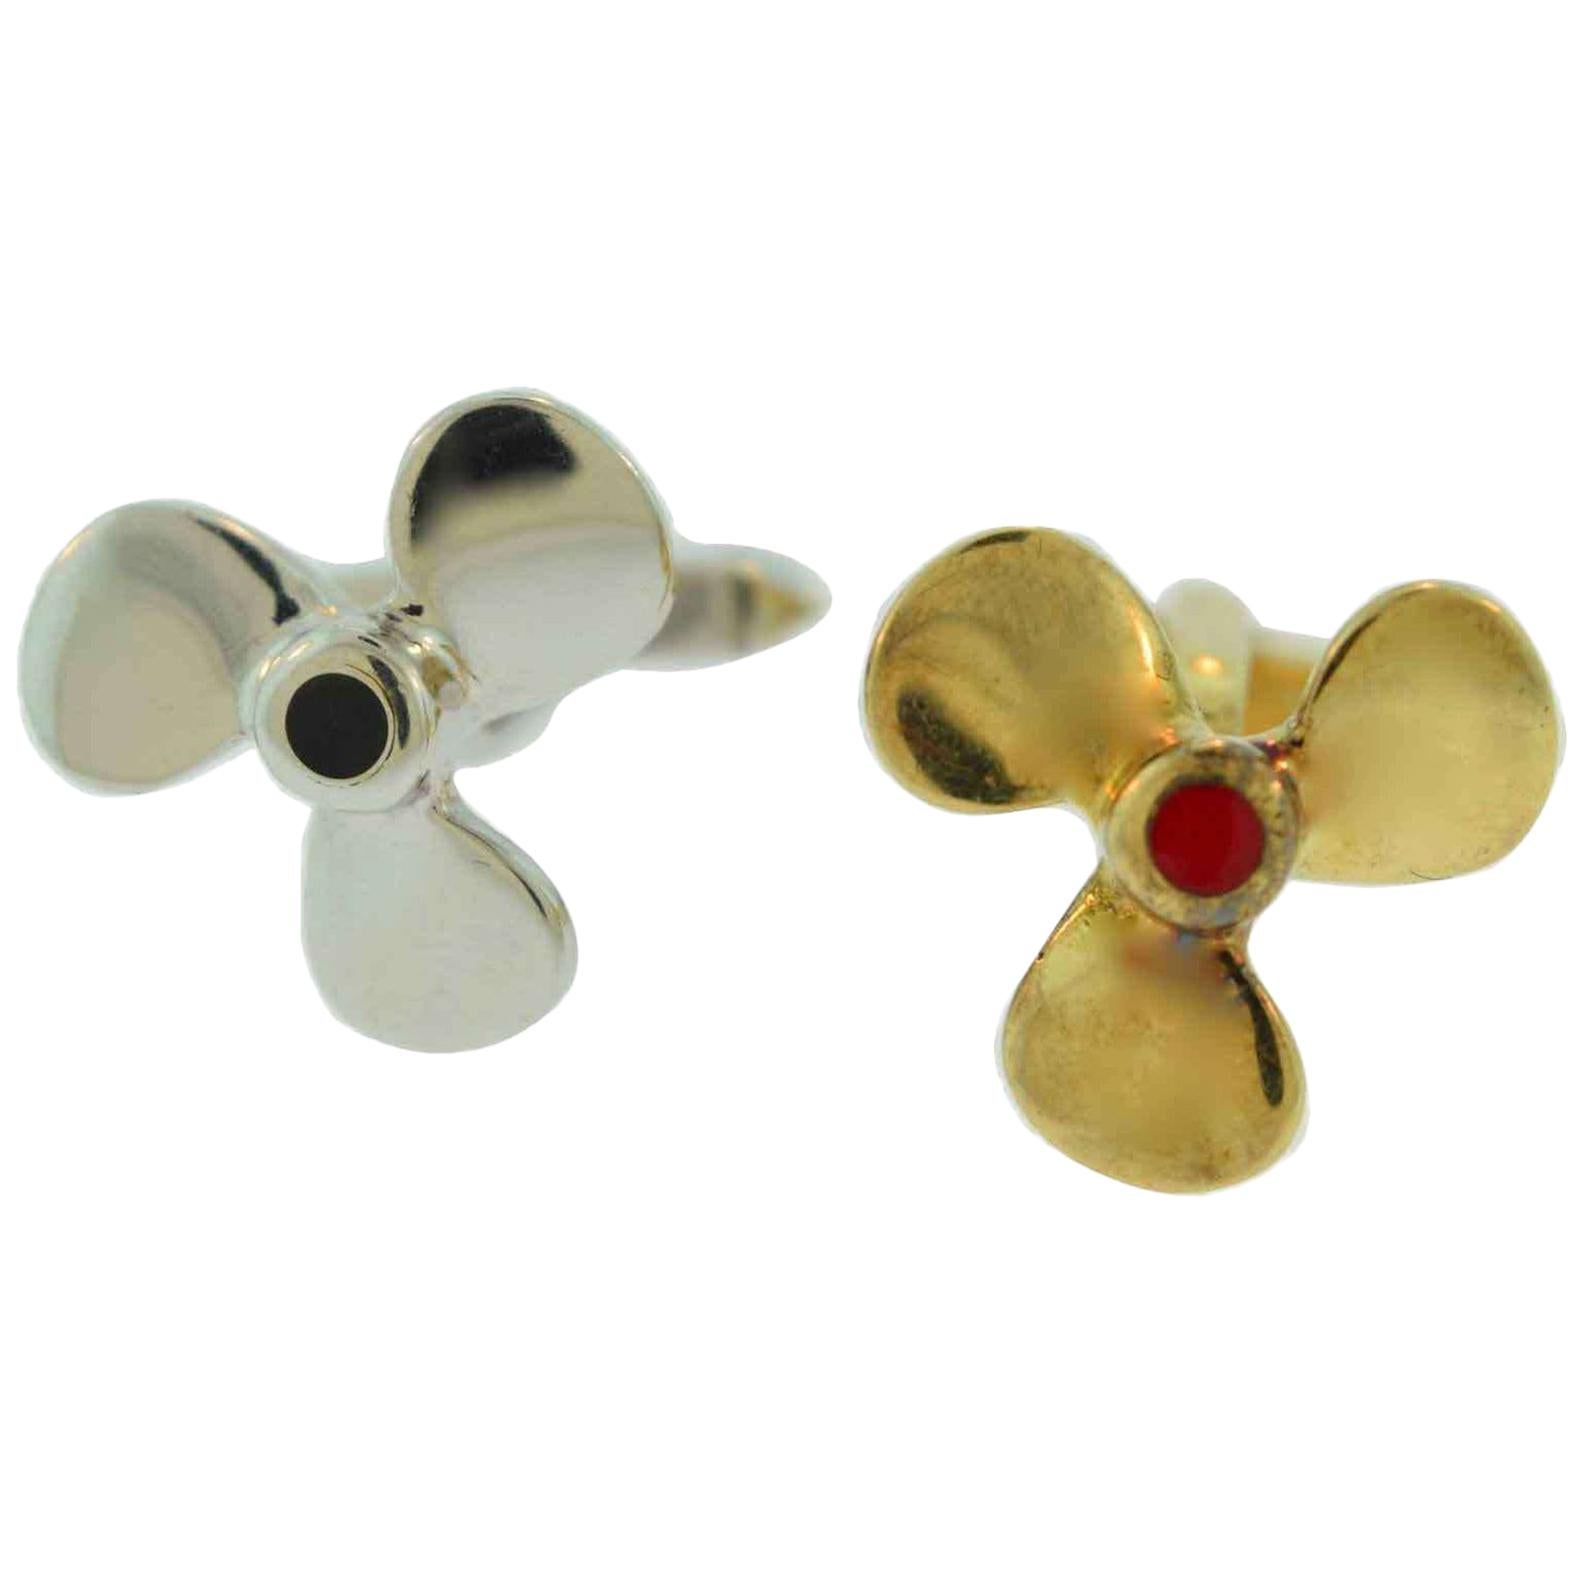 Two-Tone Propeller Yellow and White Gold 18 Karat, Blue and Red Enamel Cufflinks